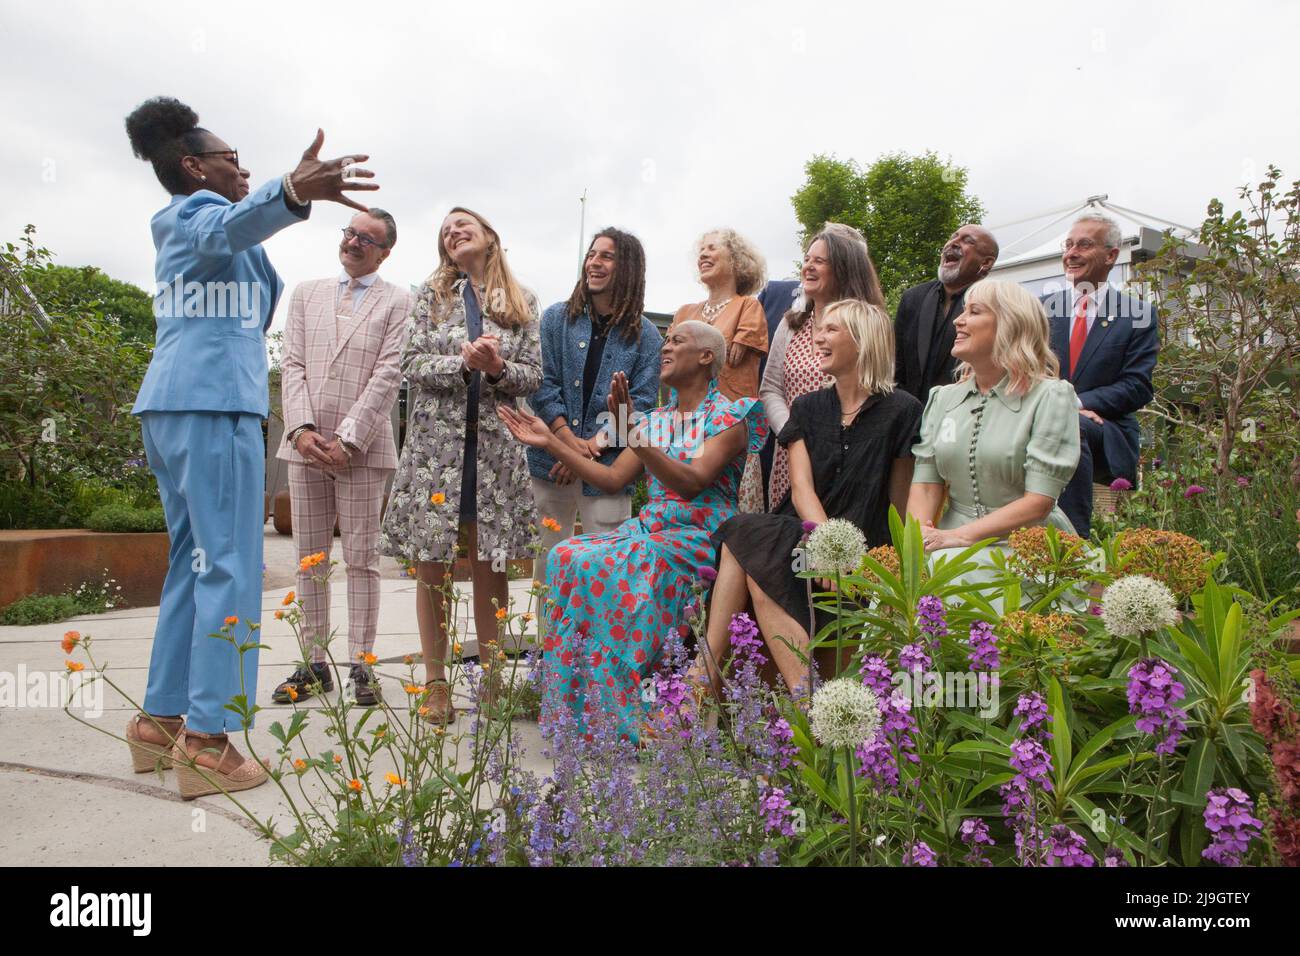 London, UK, 23 May 2022: Outgoing RHS ambassador Flowella BNenjamin, left, addresses the ten new ambassadors announced at Chelsea Flower Show, including Simon Lycett, Kate Bradbury, Tayshan Hayden Smith, Sue Kent, Mark Gregory, incoming RHS president Clare Matterson, Manoj Malde, James Alexander-Sinclair and seated Arit Anderson,  Jo Wiley and Nicki Chapman.  Anna Watson/Alamy Live News Stock Photo